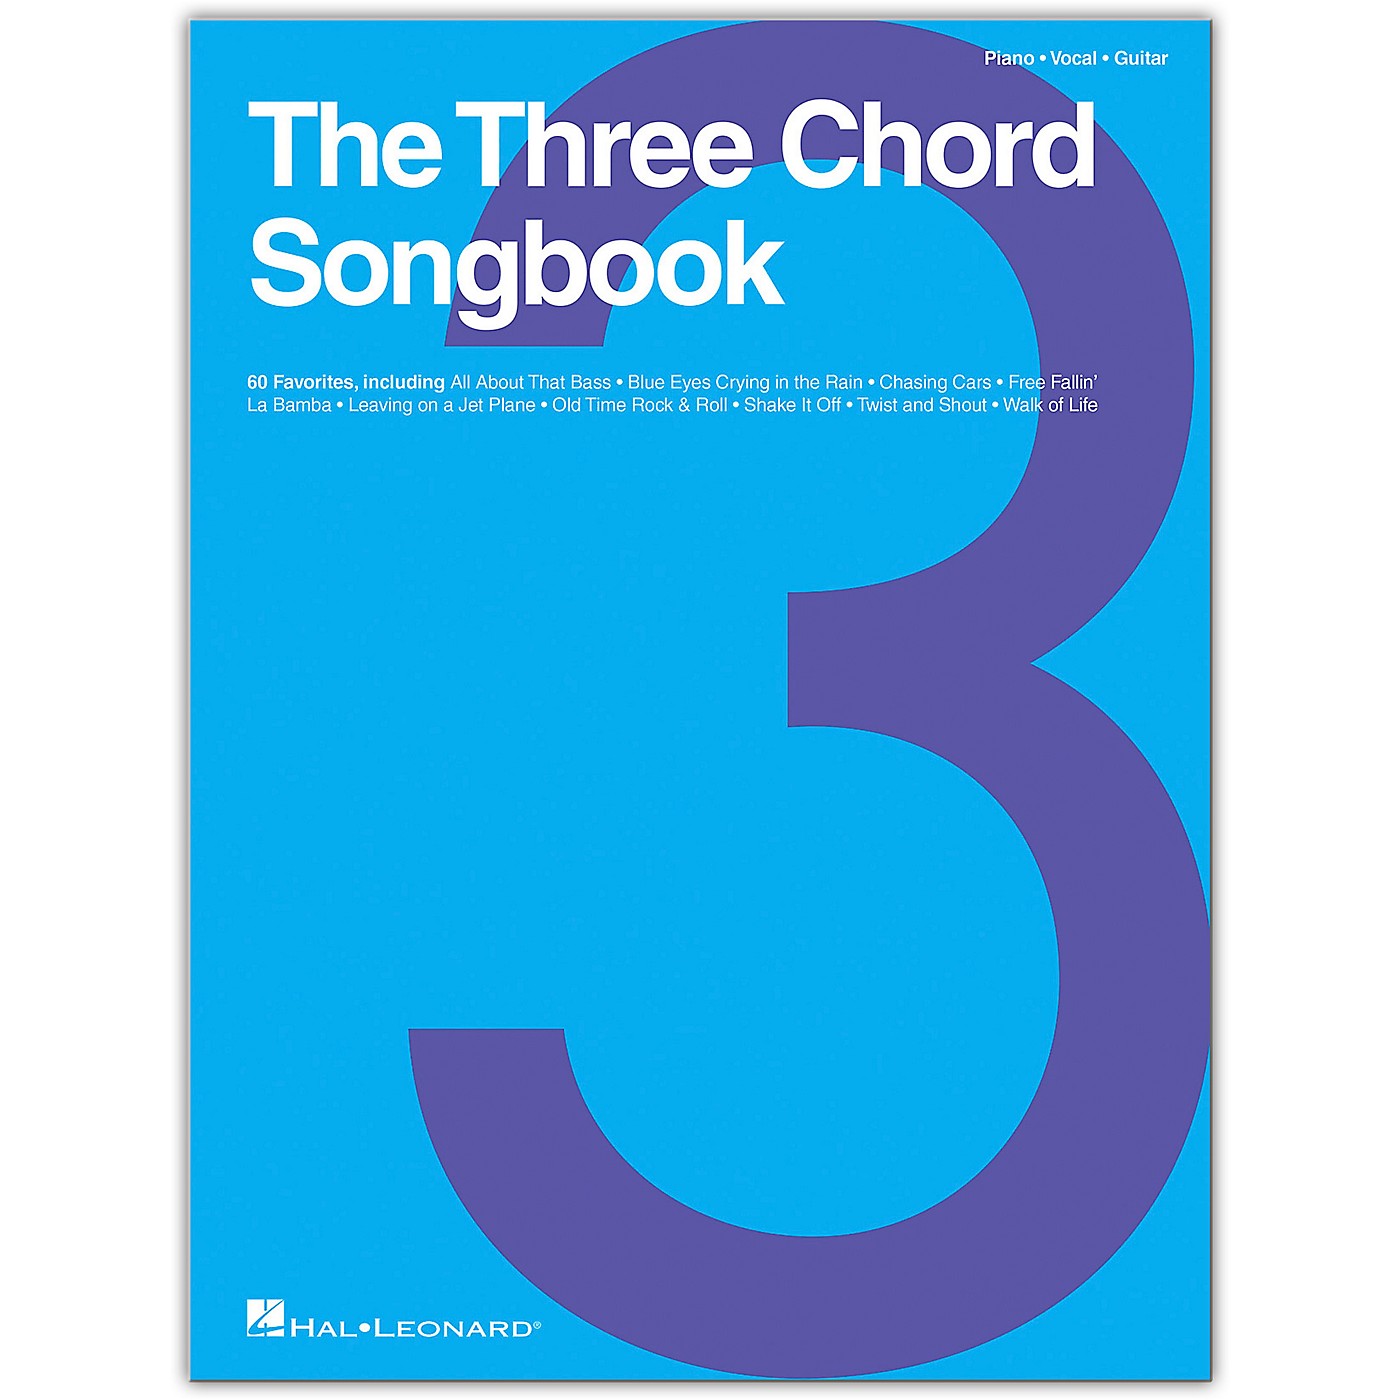 Hal Leonard The Three Chord Songbook Piano/Vocal/Guitar Songbook thumbnail